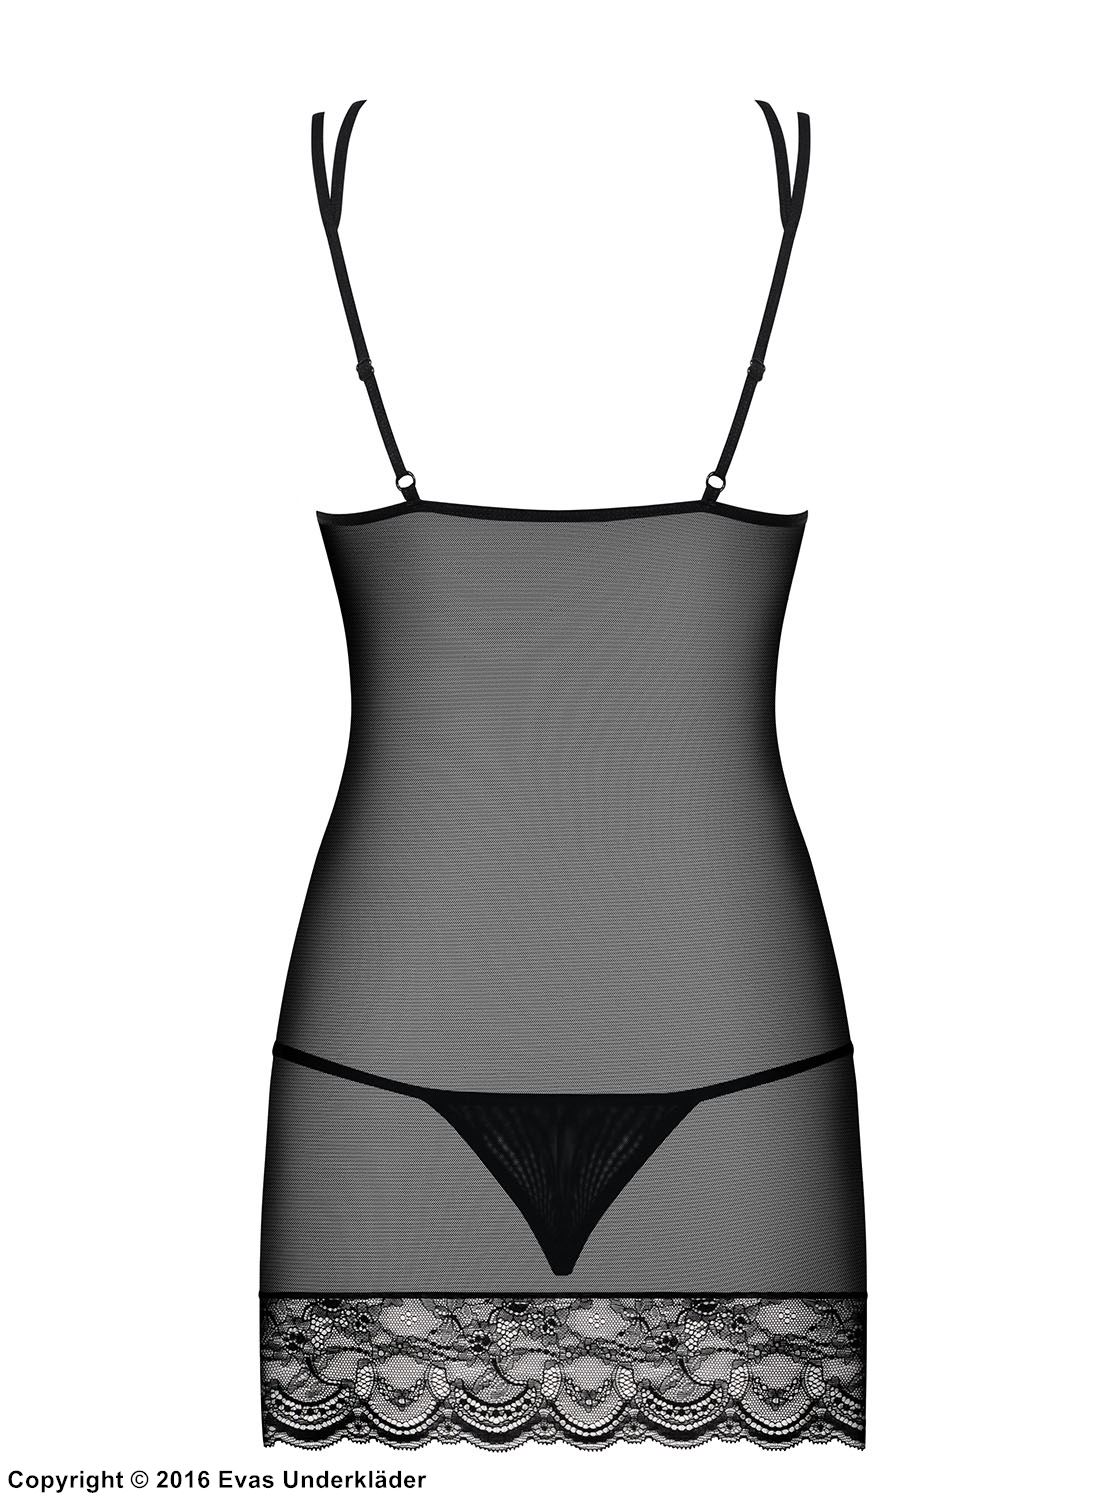 Seductive chemise, sheer mesh and lace, crossing straps